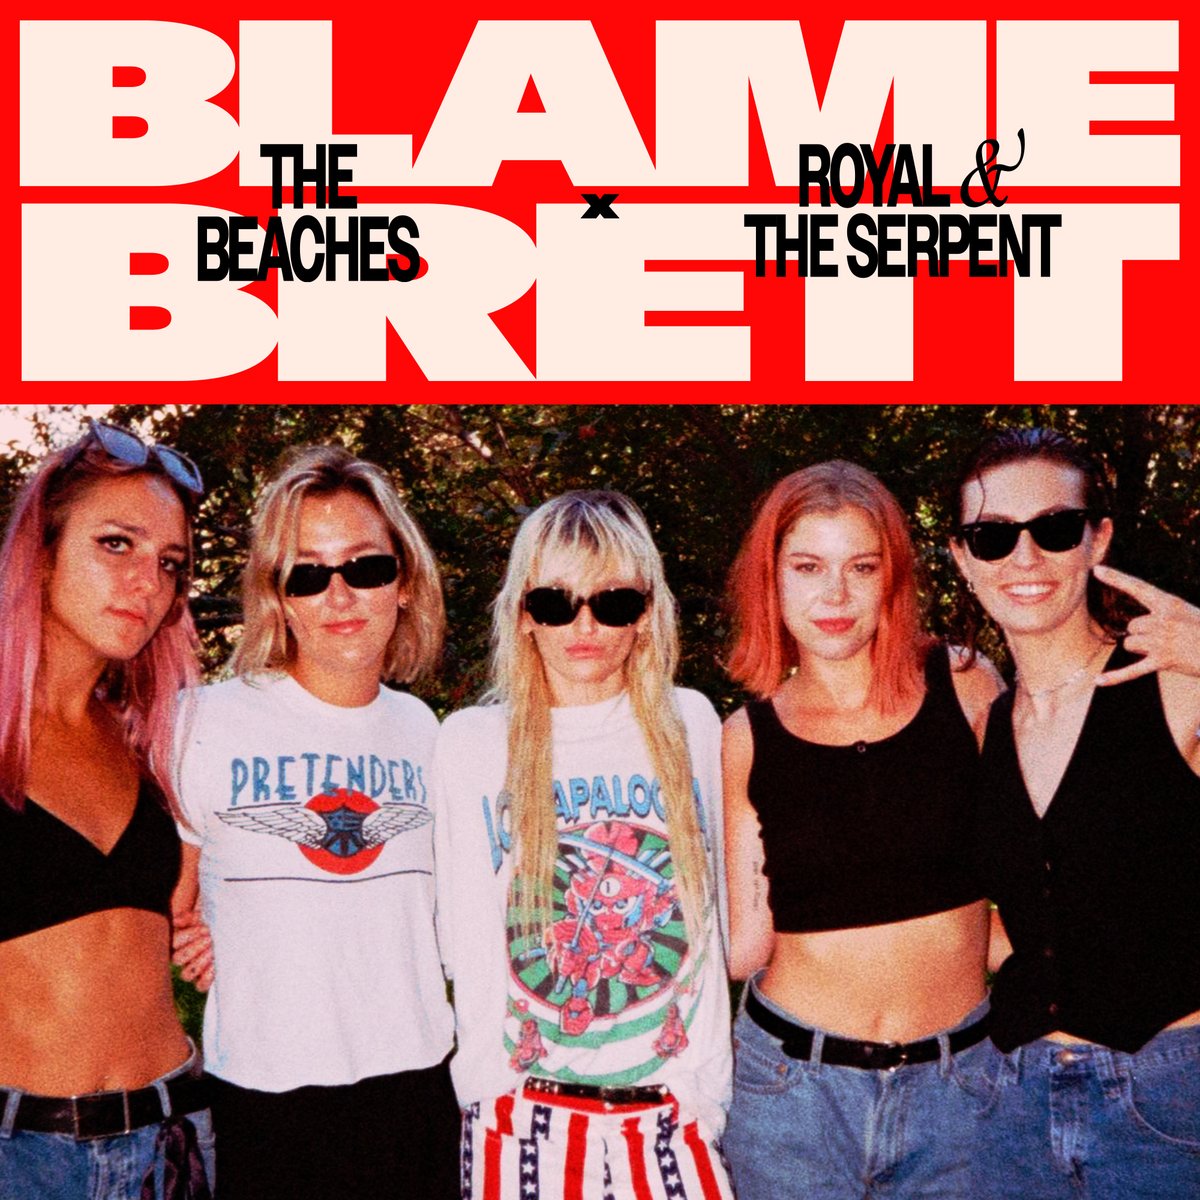 .@royalandtheserp auditioned to be in our band & we’re thrilled to announce that she got the GOLDEN BUZZER! May we present: Blame Brett by Beaches & the Serpent! 👑🐍 Listen here - thebeaches.ffm.to/bbrts